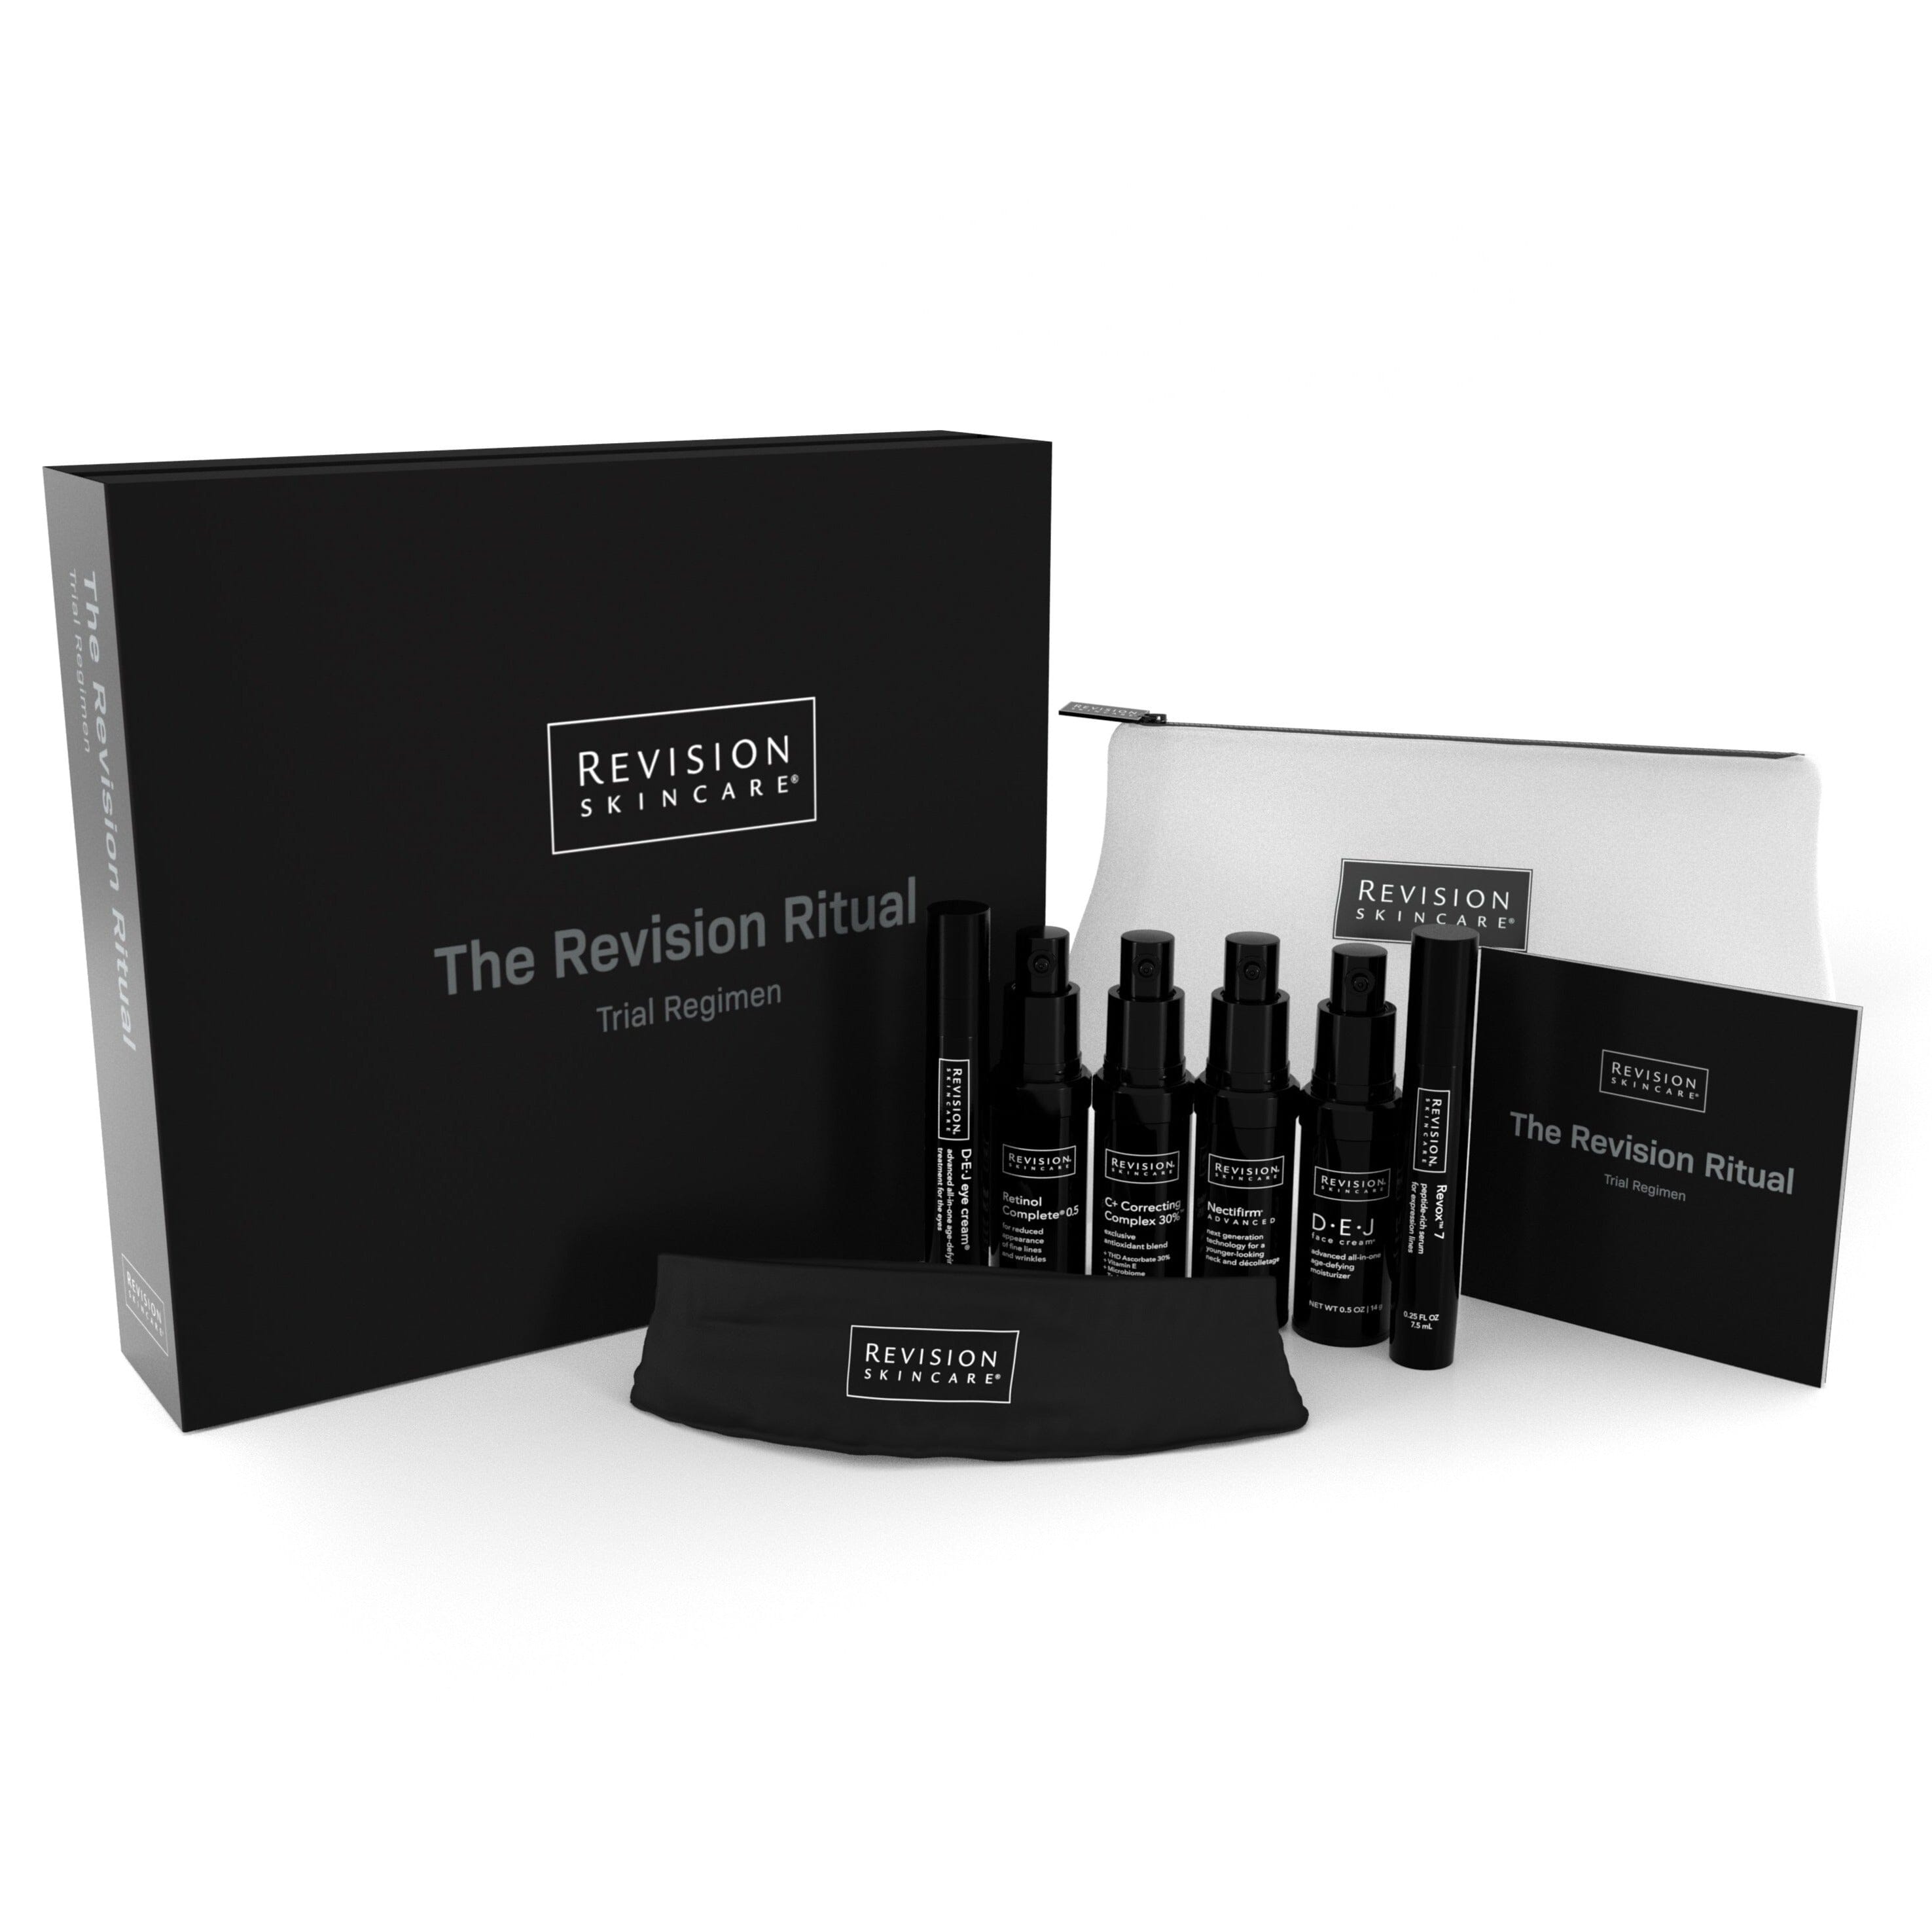 Revision Skincare The Revision Ritual Trial Regimen Revision Shop at Exclusive Beauty Club